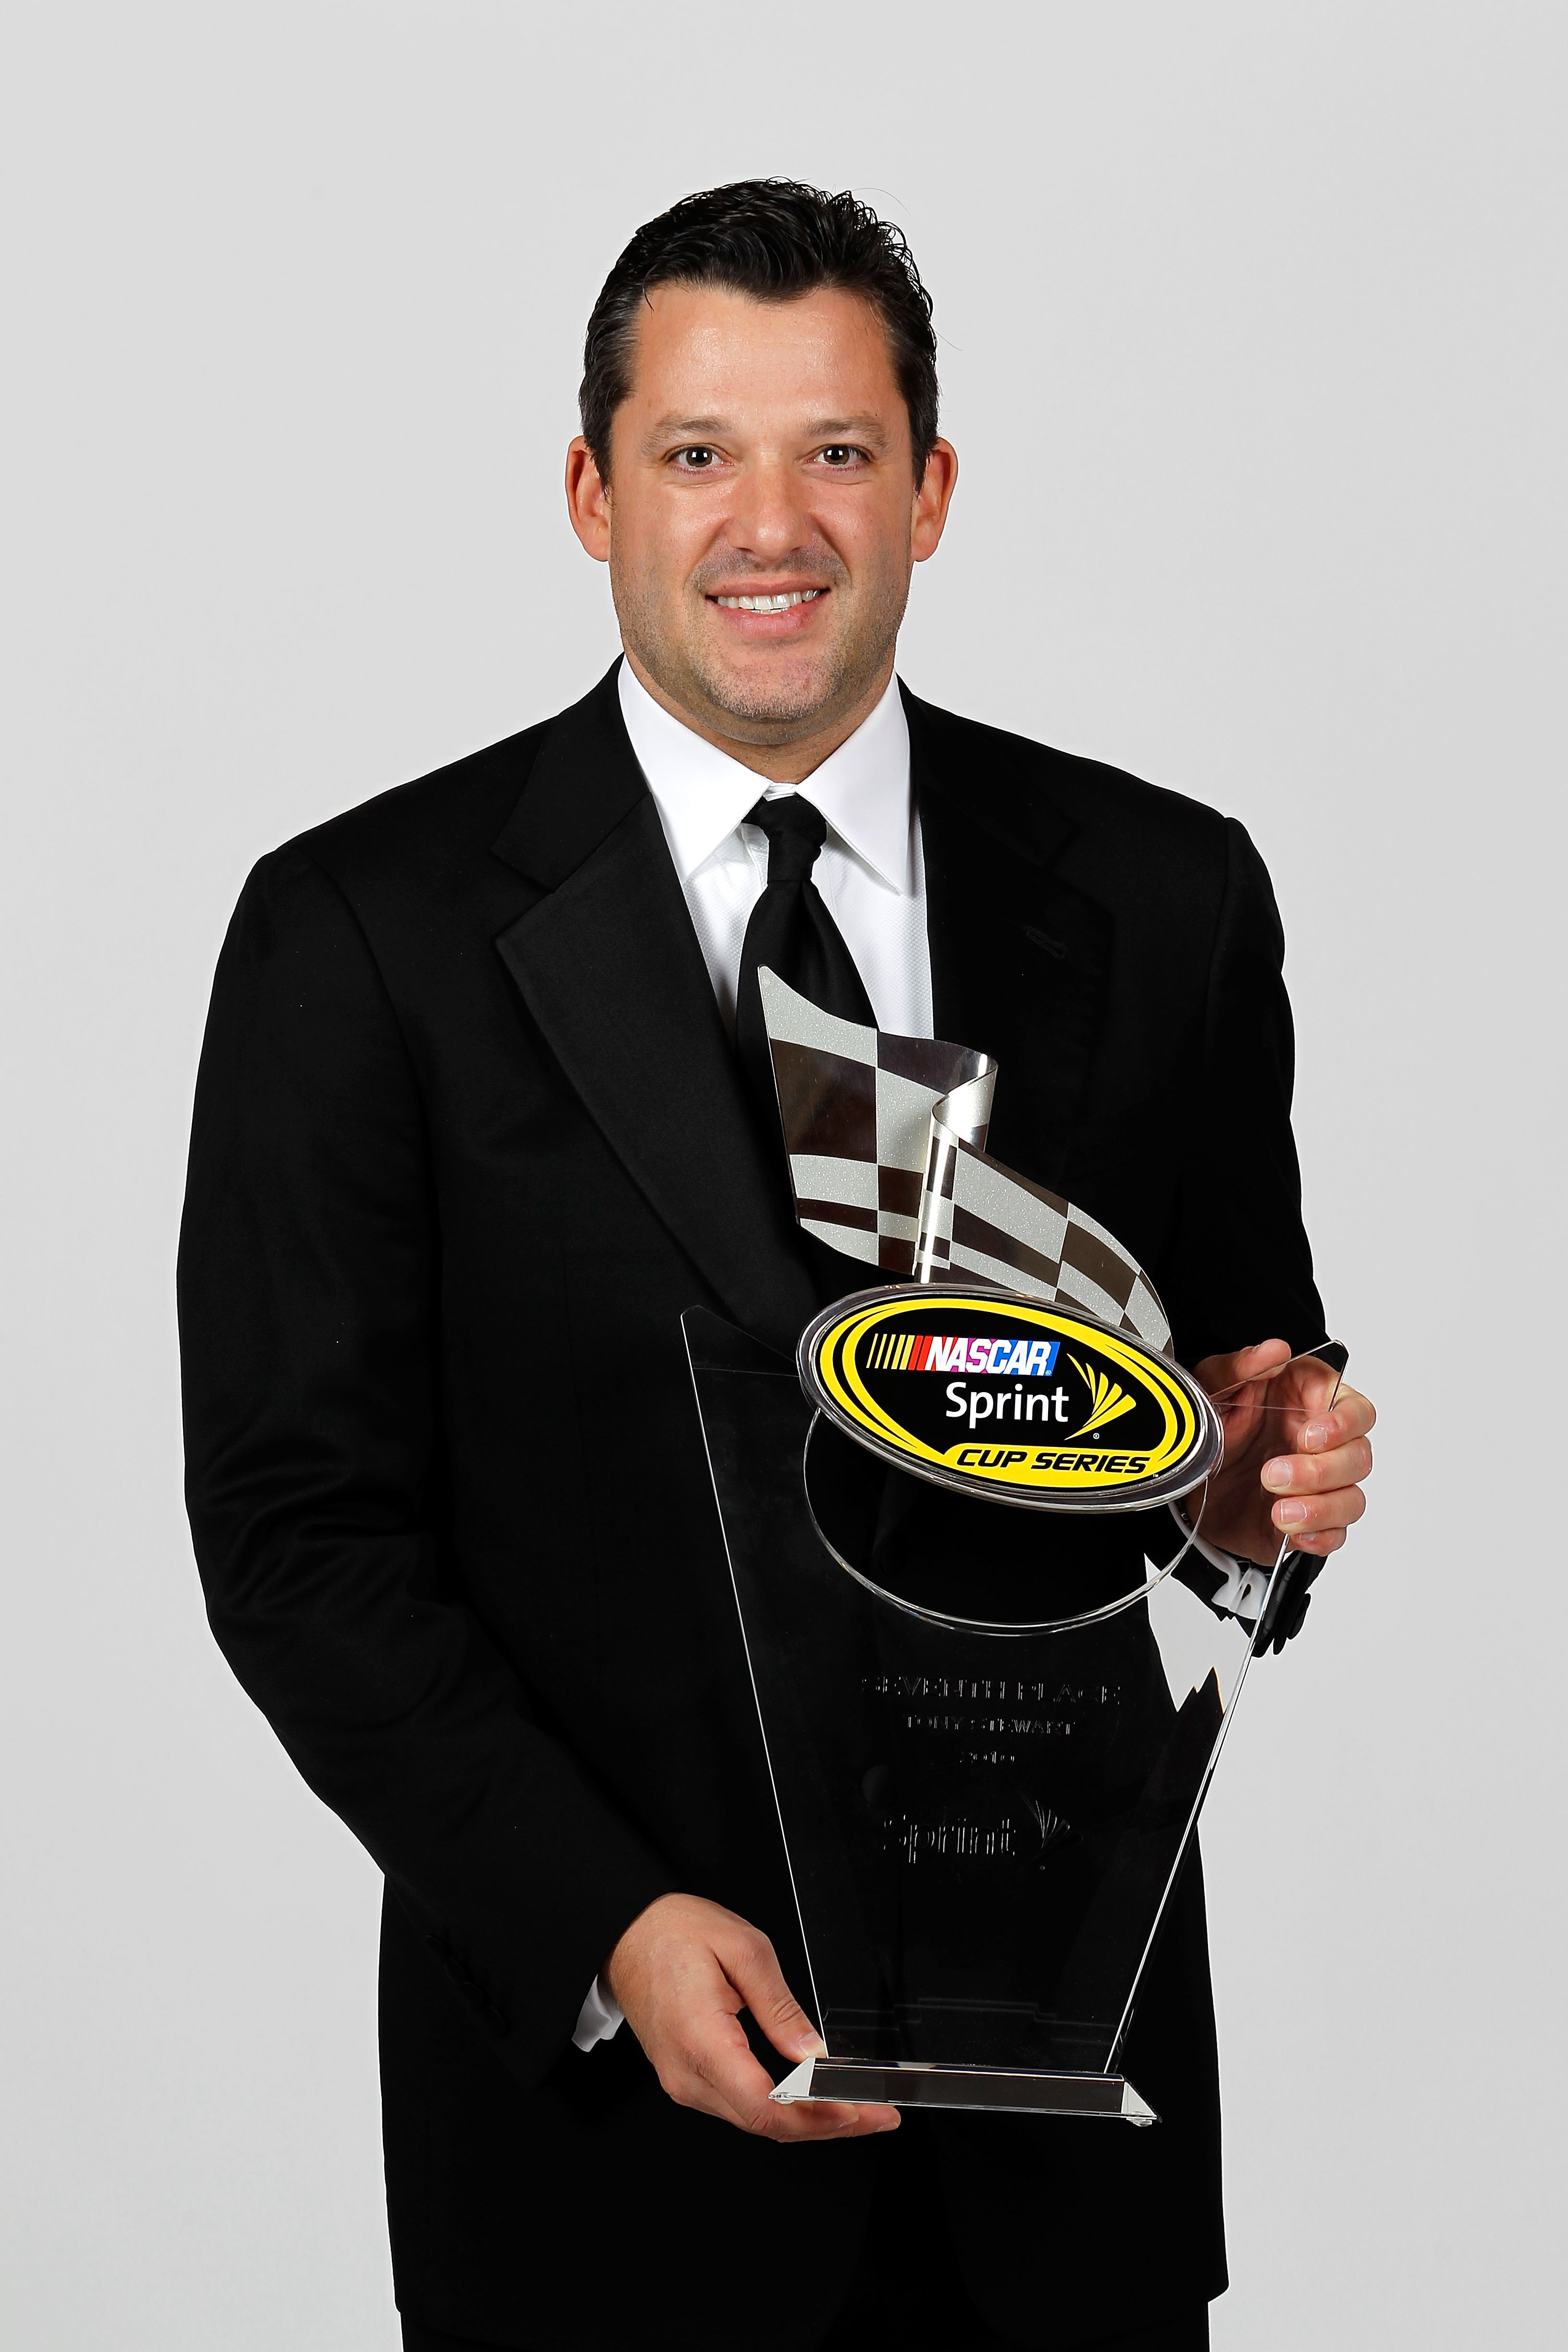 LAS VEGAS, NV - DECEMBER 03:  NASCAR driver Tony Stewart poses with his seventh place trophy during the NASCAR Sprint Cup Series awards banquet at the Wynn Las Vegas Hotel on December 3, 2010 in Las Vegas, Nevada.  (Photo by Todd Warshaw/Getty Images for 